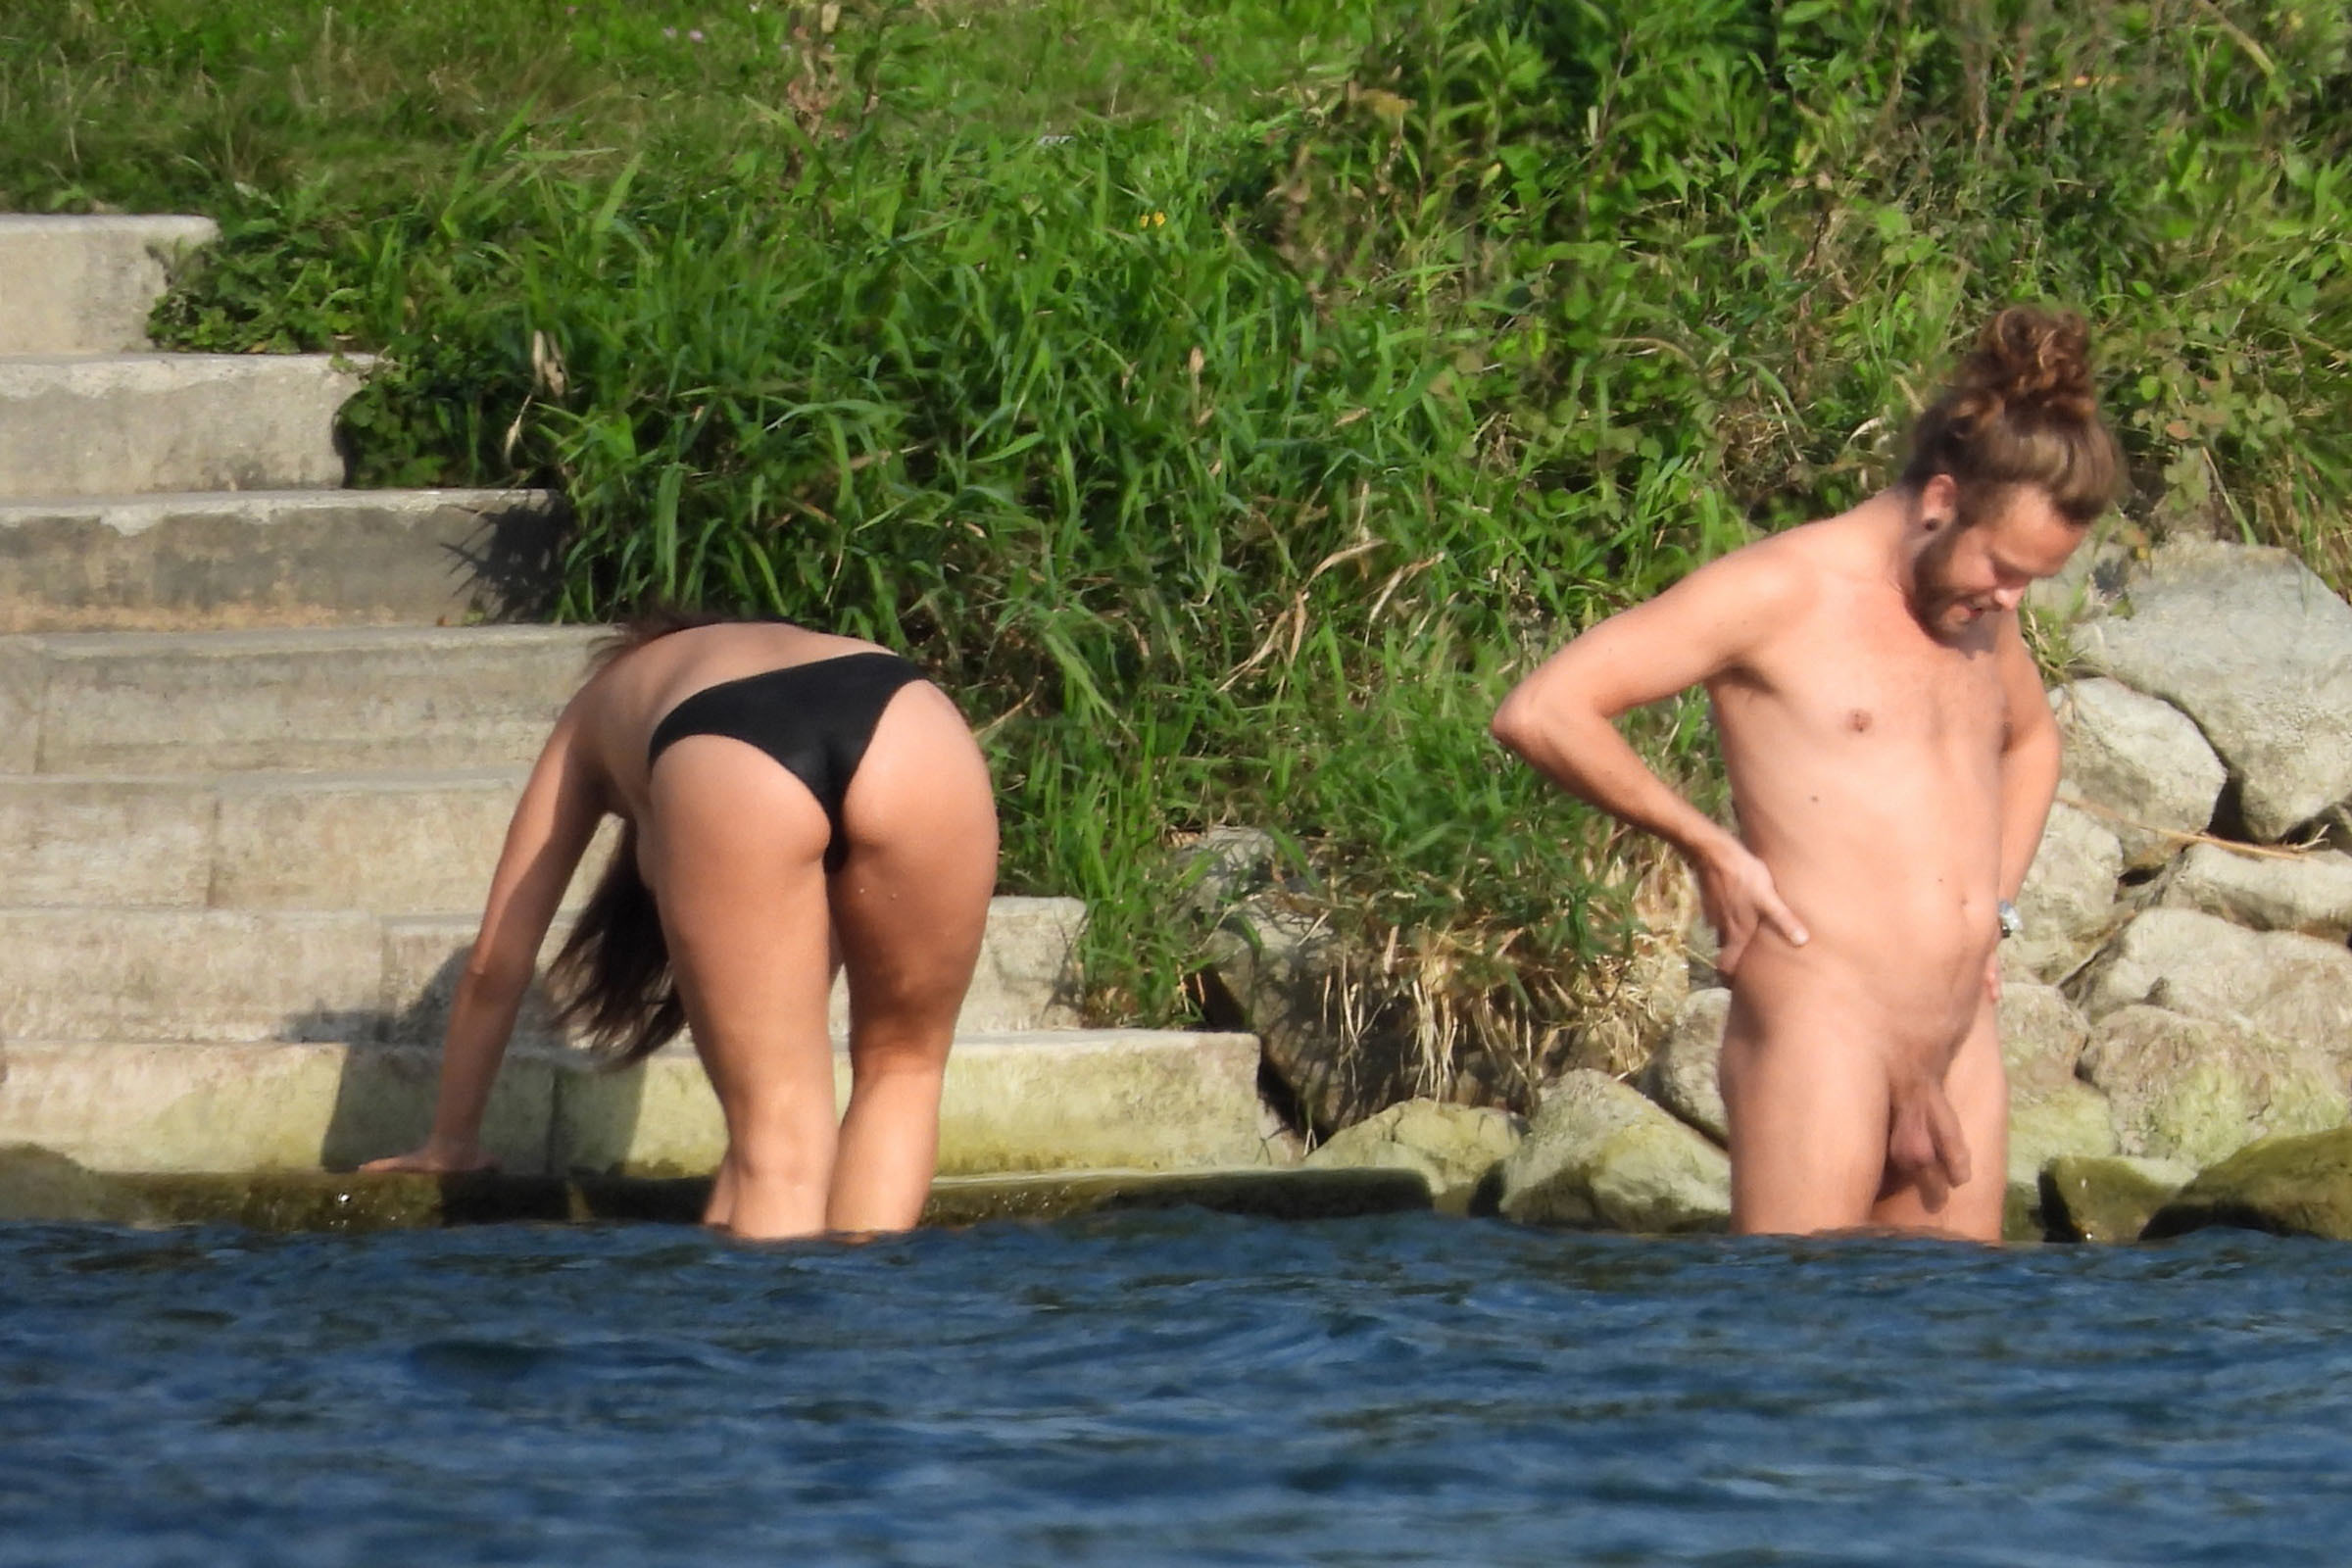 https://clairwills.blogspot.com/2022/04/202009-couple-nude-donauinsel.html